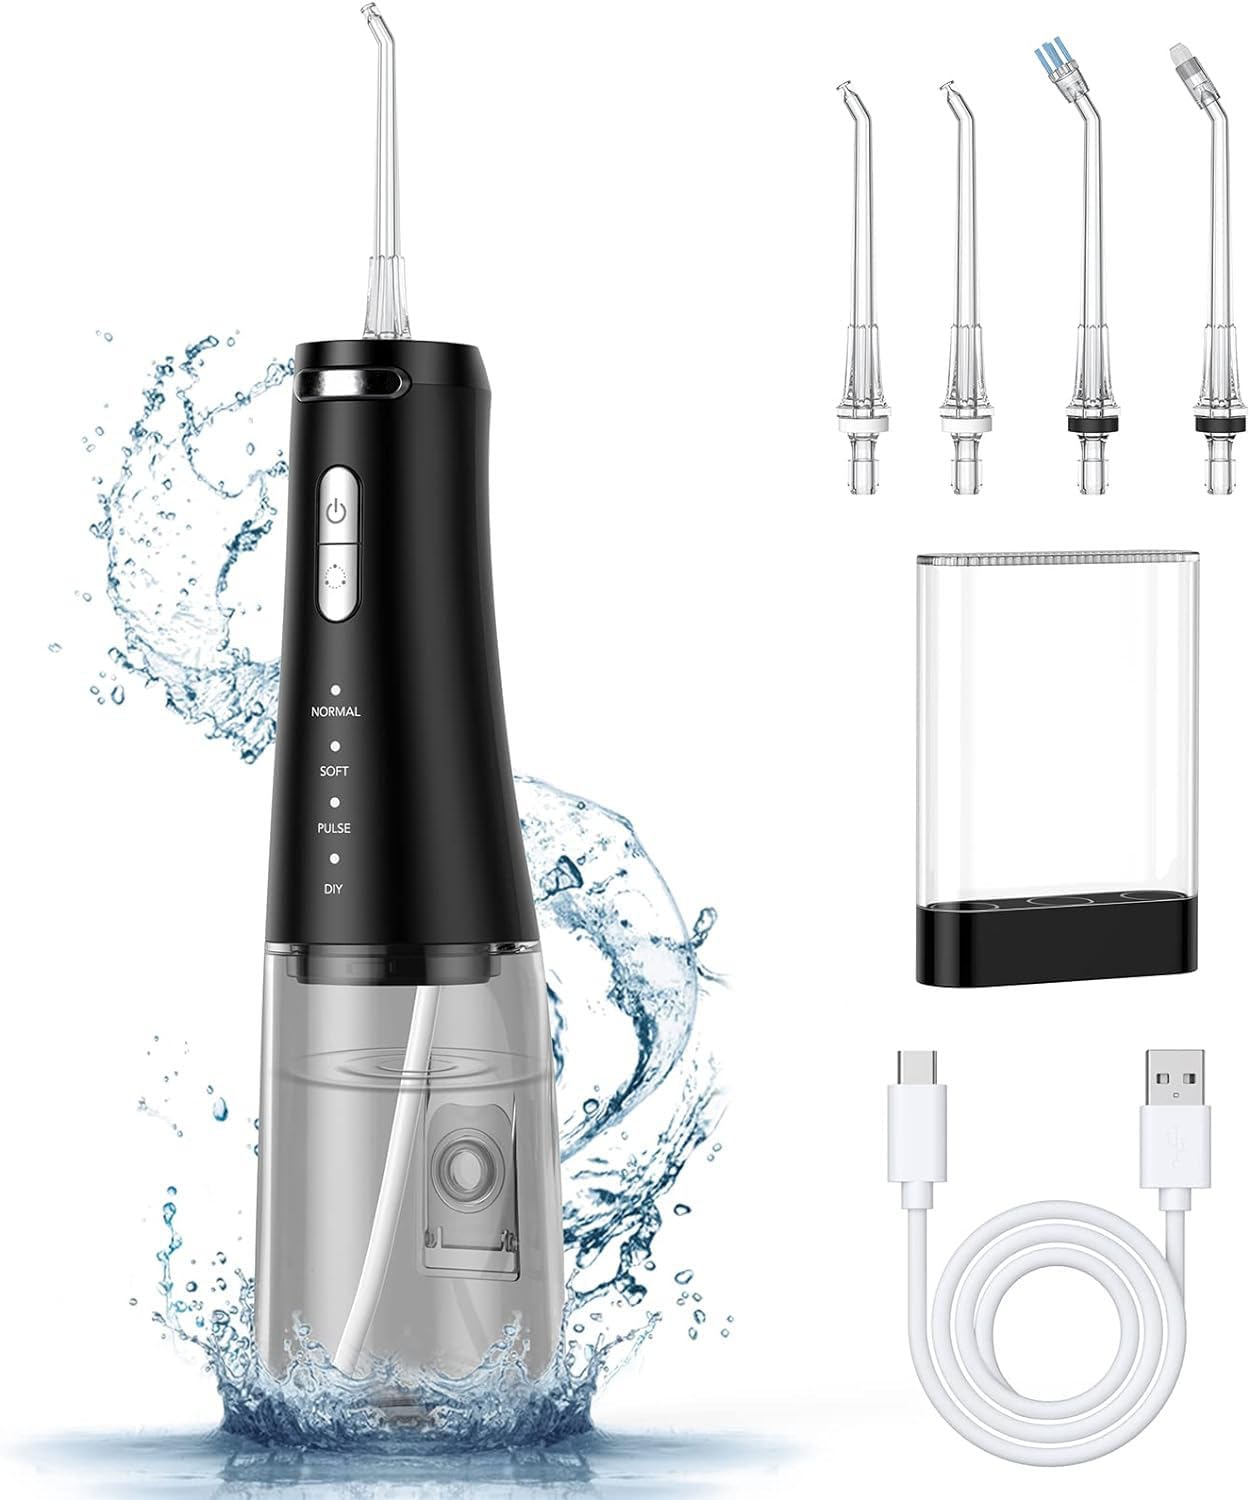 Cordless Water Flosser Dental, 2500mAh Battery with USB Fast Charging Water Flosser Teeth Cleaner, 300ML Capacity and Portability for Home and Travel, 4 Replaceable Jet Tips Without Noise (Gray)